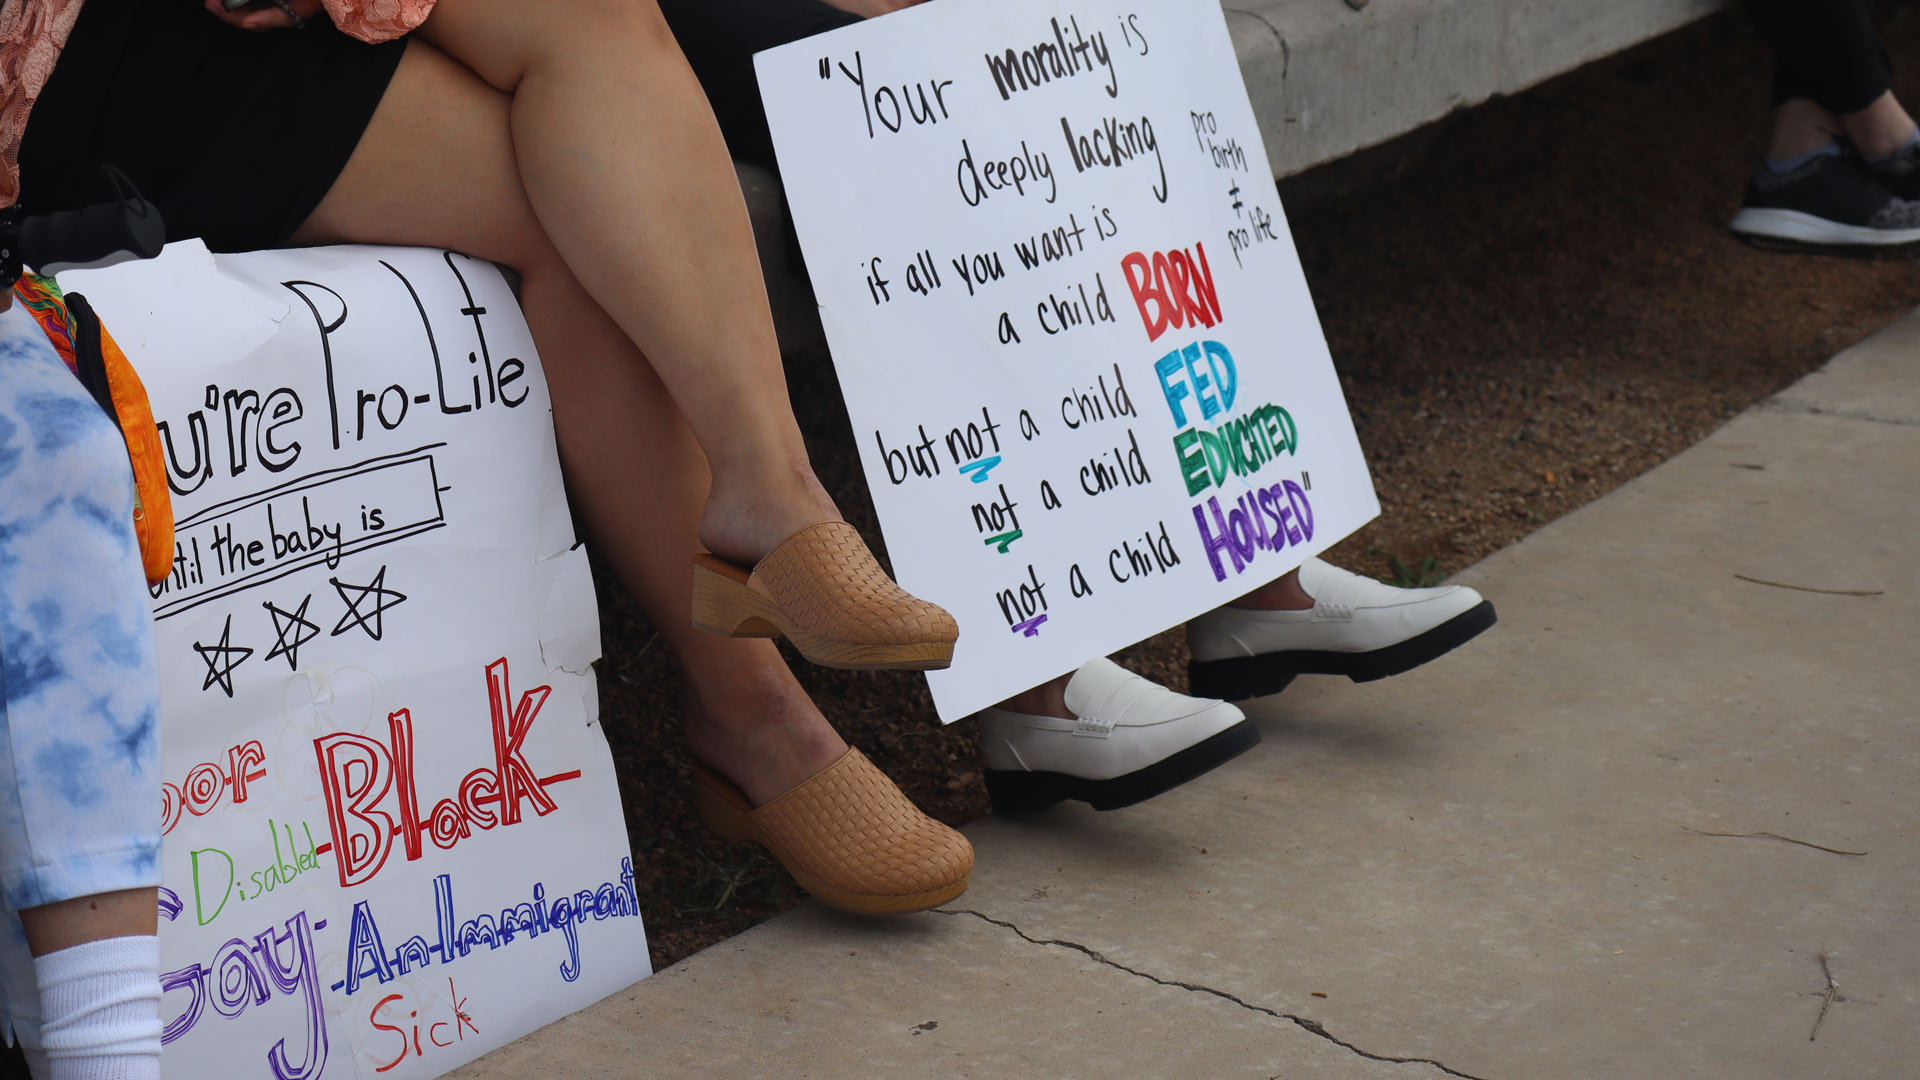 Protestors gathered at the Centennial Pavilion stage in Veteran's Memorial Park in Sierra Vista to protest the U.S. Supreme Court's decision to overturn Roe v. Wade. July 2, 2022